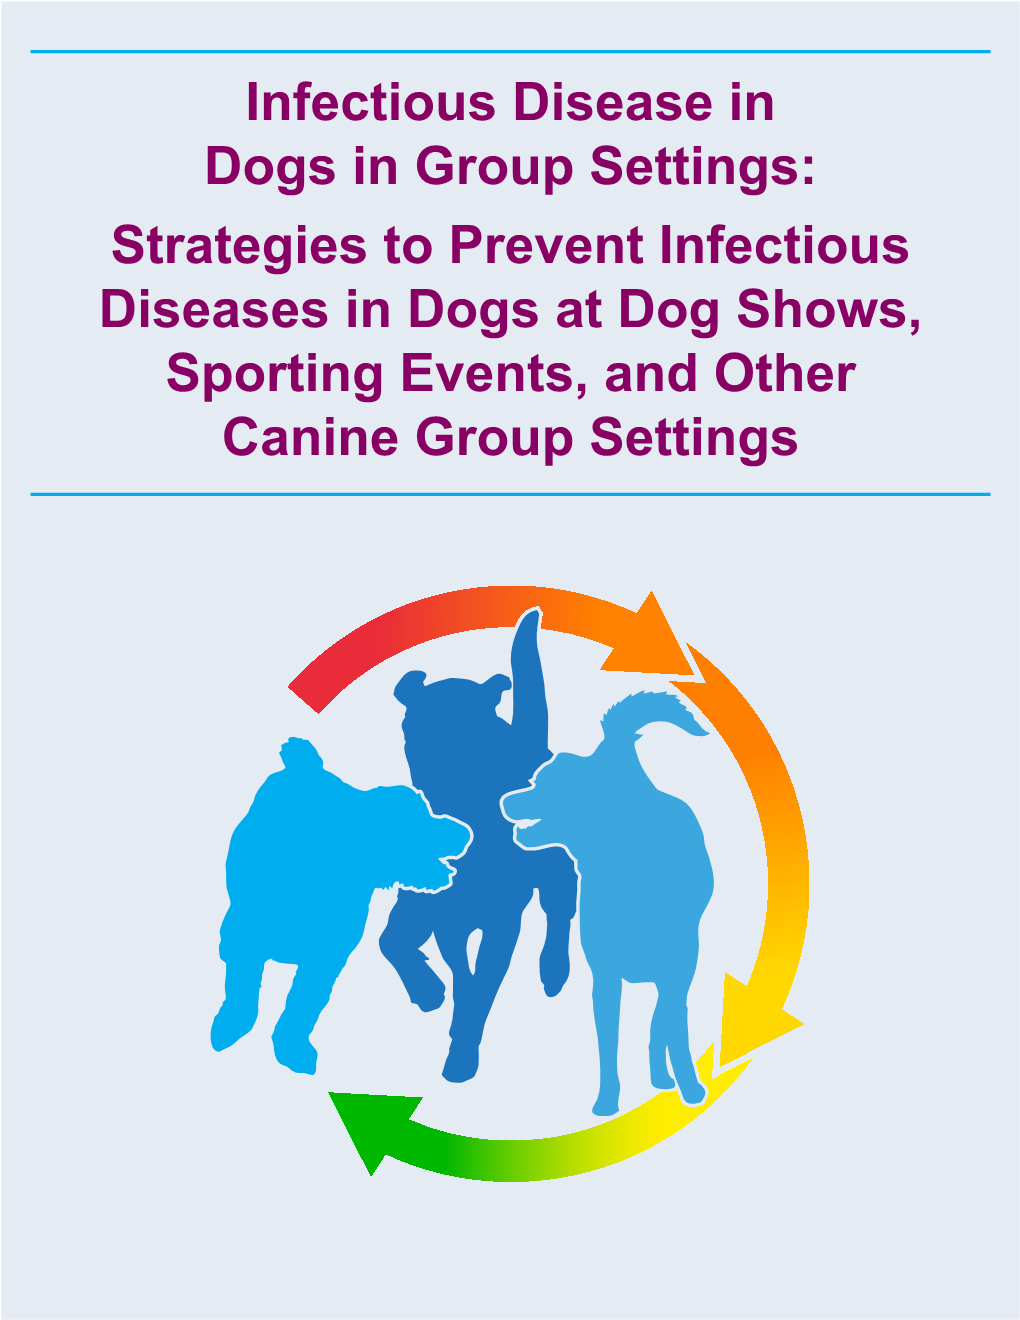 Infectious Disease in Dogs in Group Settings: Strategies